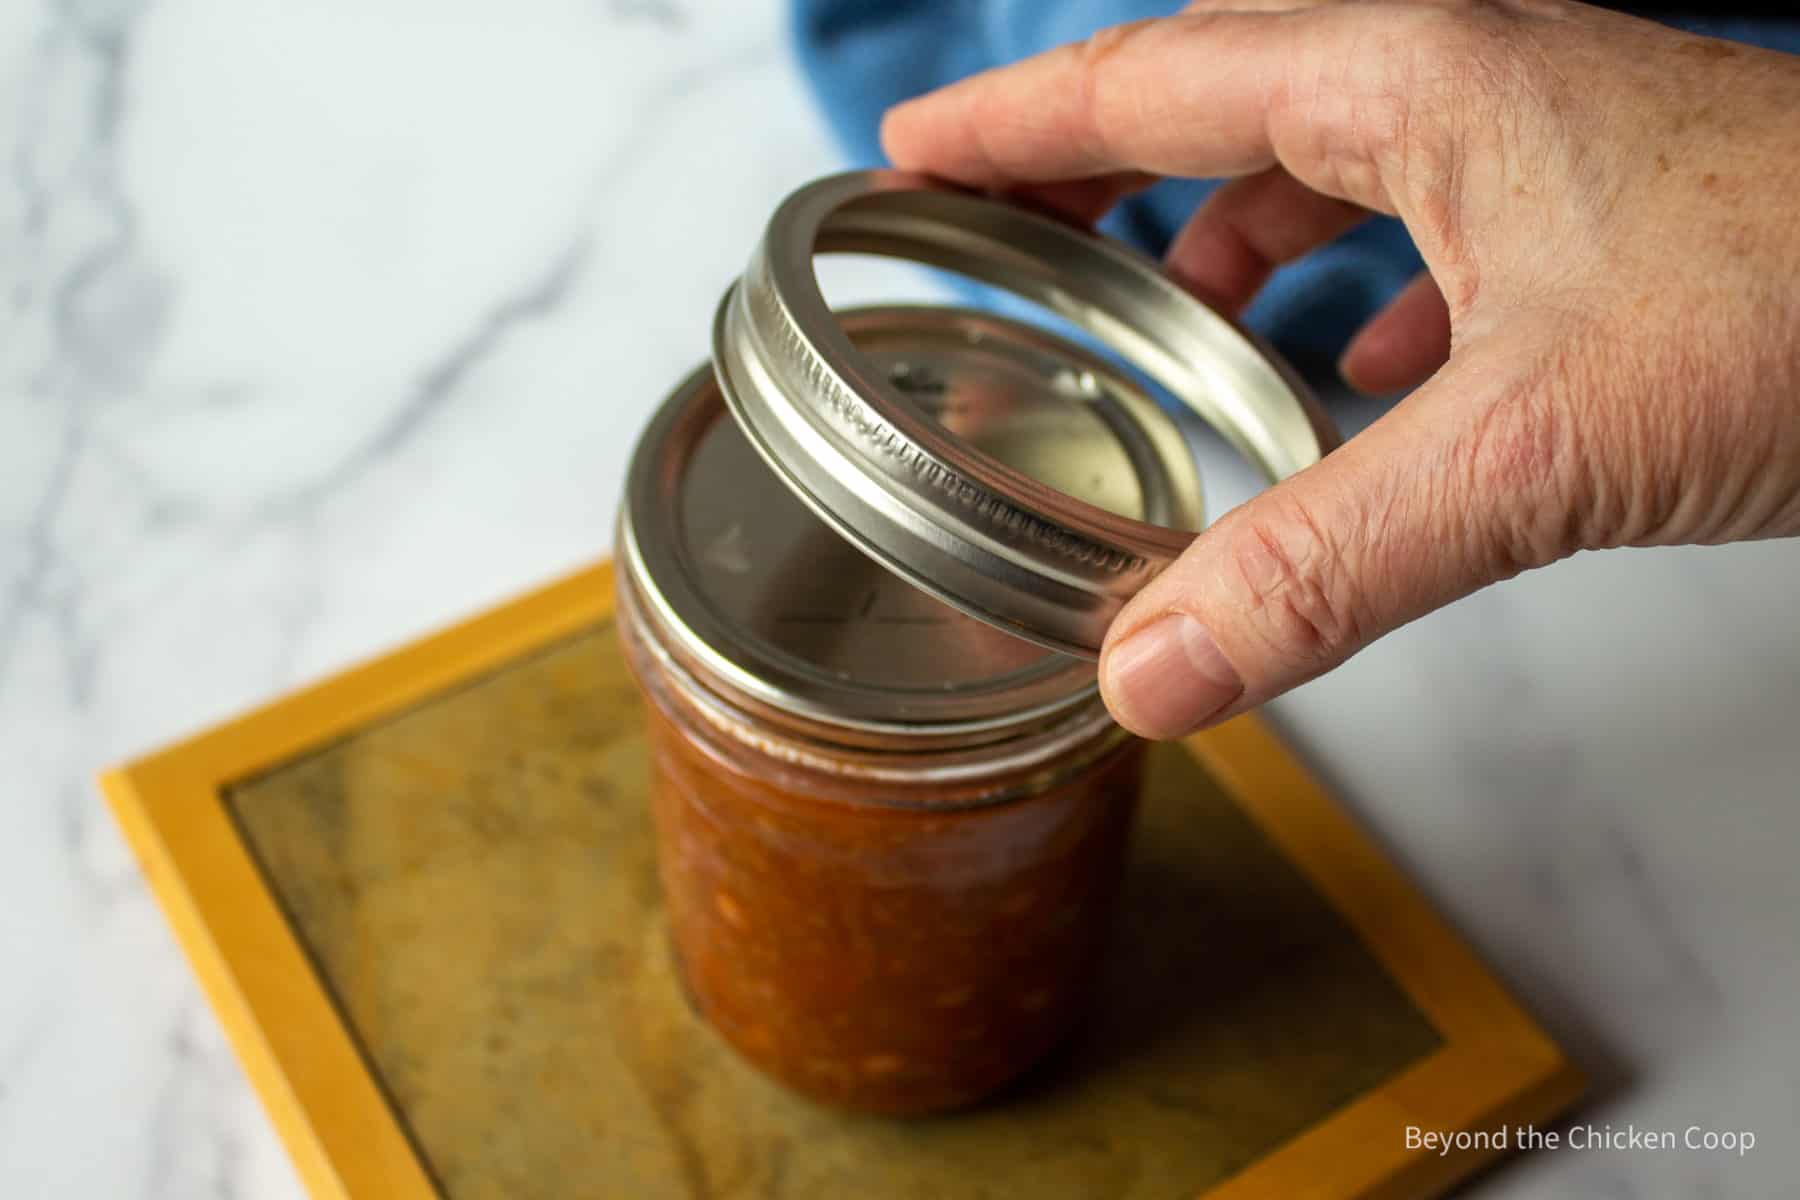 Placing a ring on a canning jar.